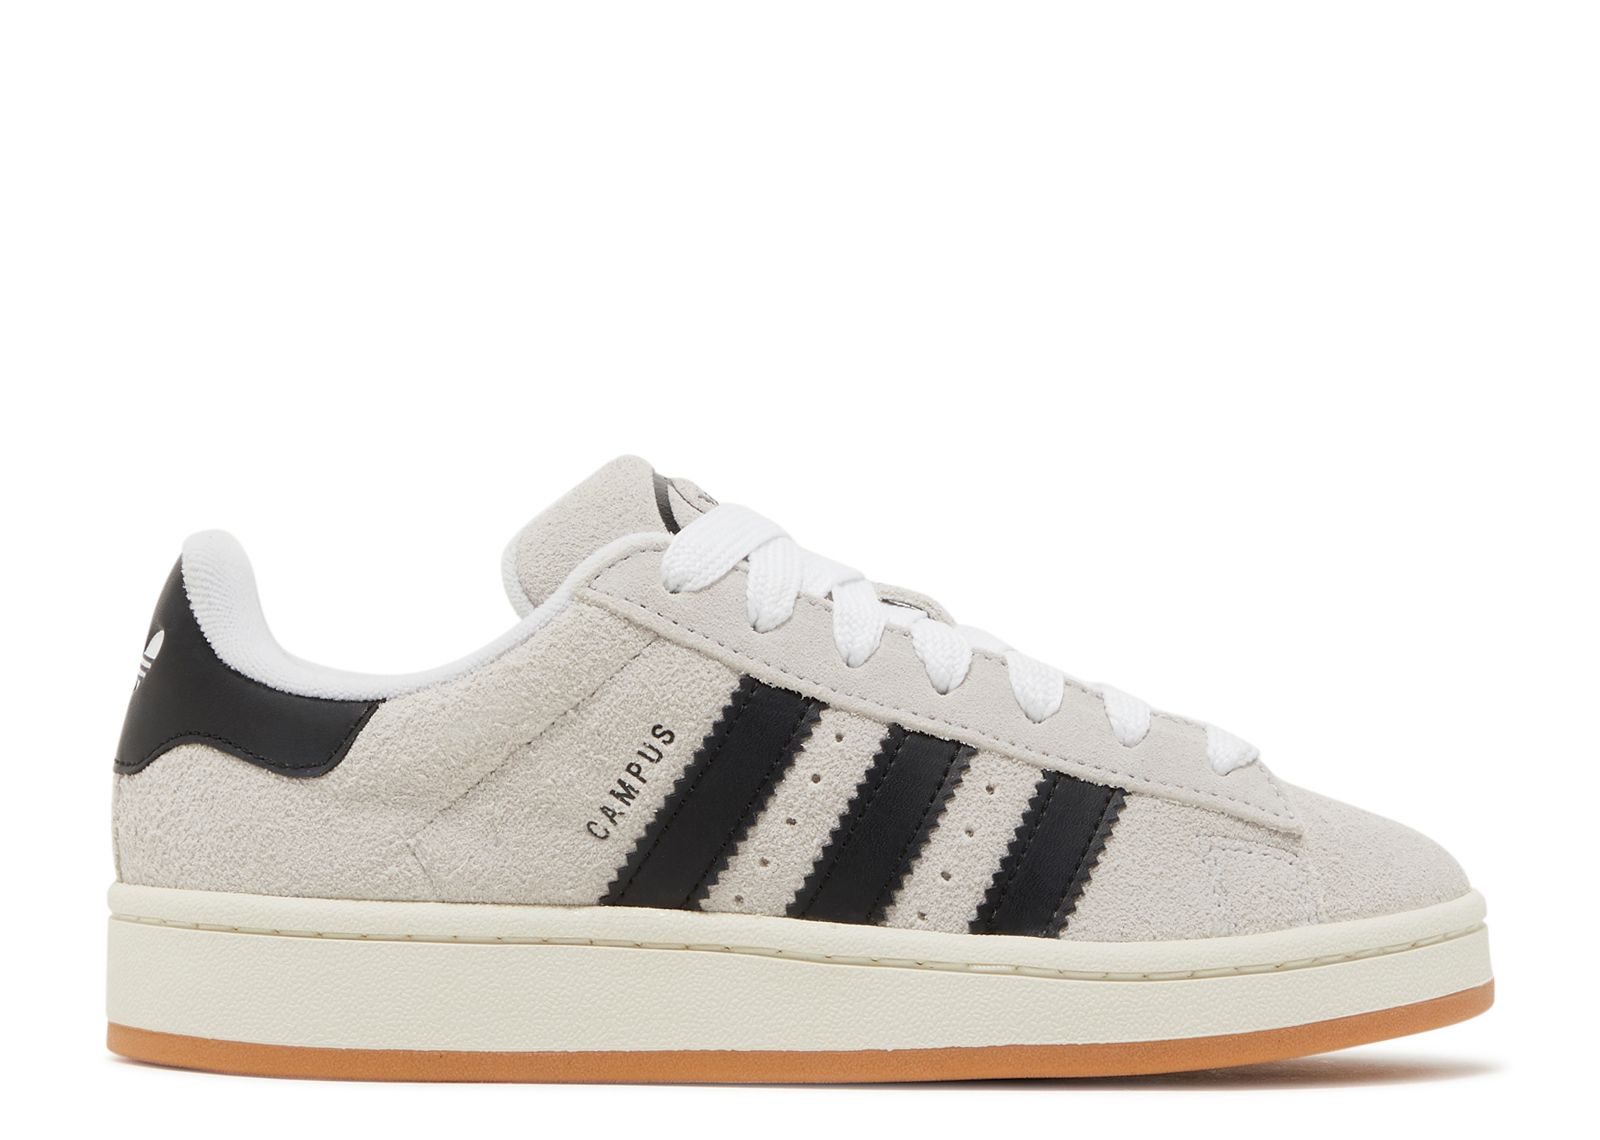 Wmns Campus 00s 'Crystal White Black' - Adidas - GY0042 - crystal white ...